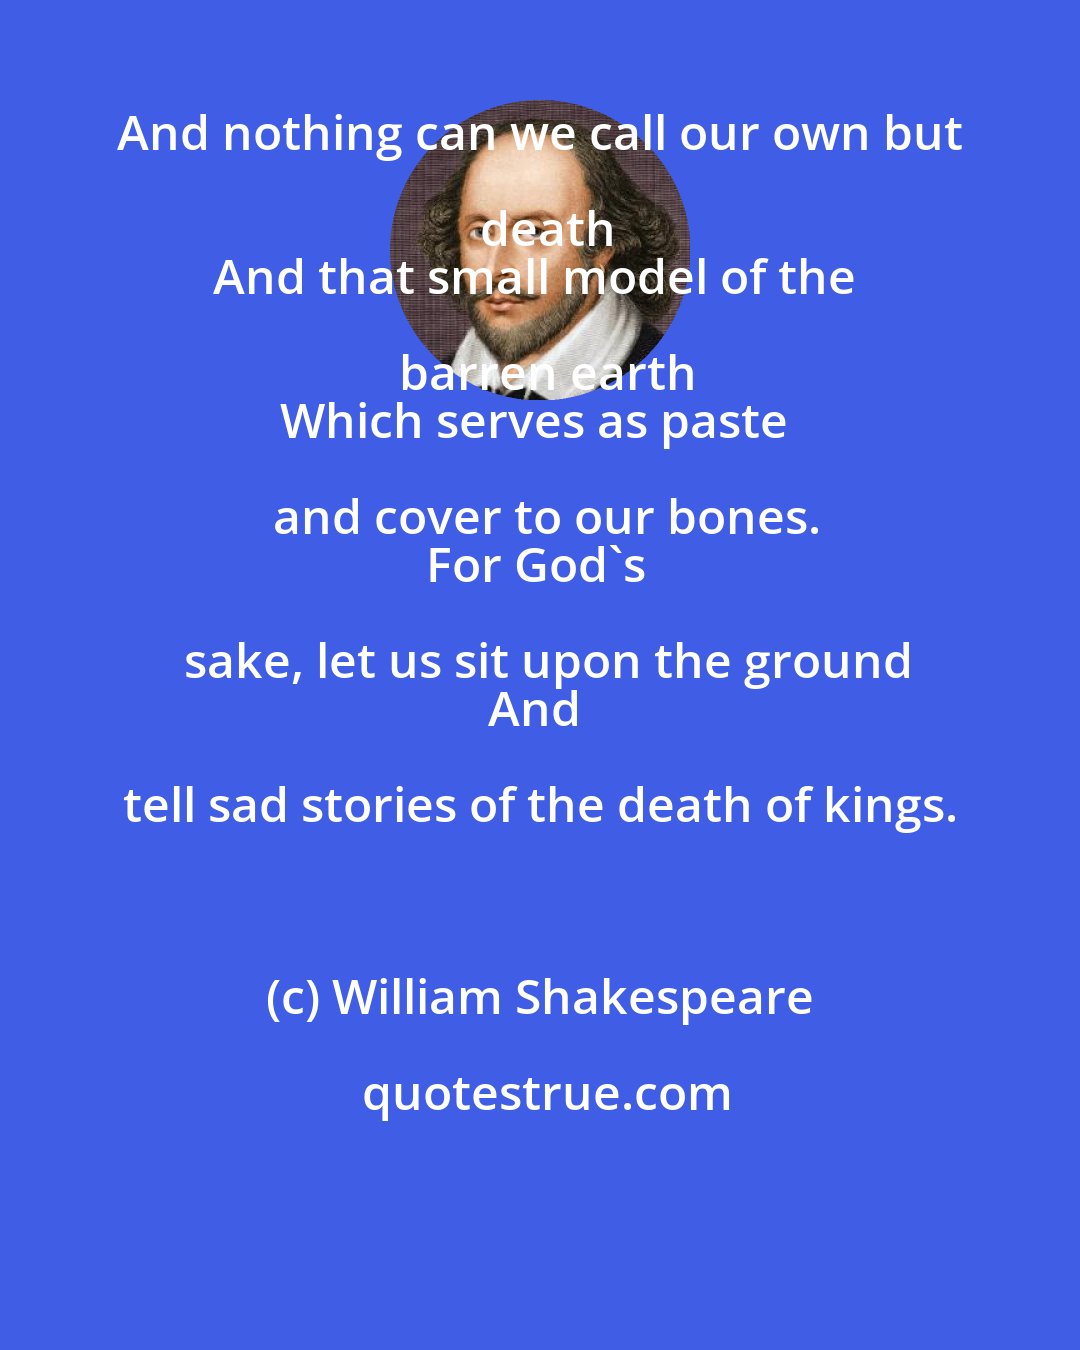 William Shakespeare: And nothing can we call our own but death
And that small model of the barren earth
Which serves as paste and cover to our bones.
For God's sake, let us sit upon the ground
And tell sad stories of the death of kings.